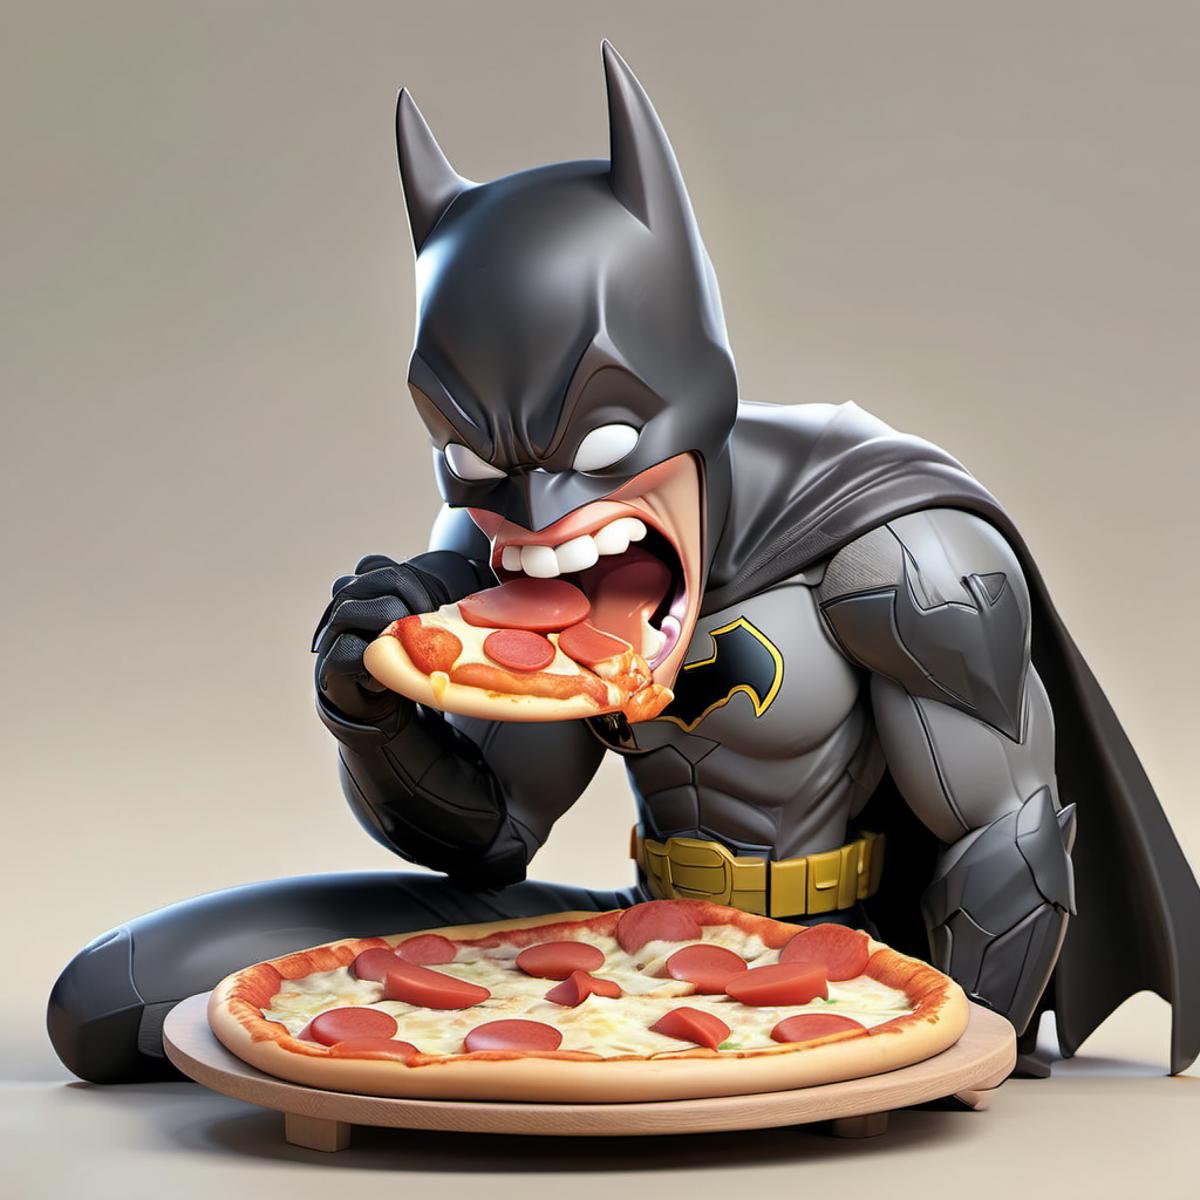 Batman Eating Pizza in a Cartoonish Style